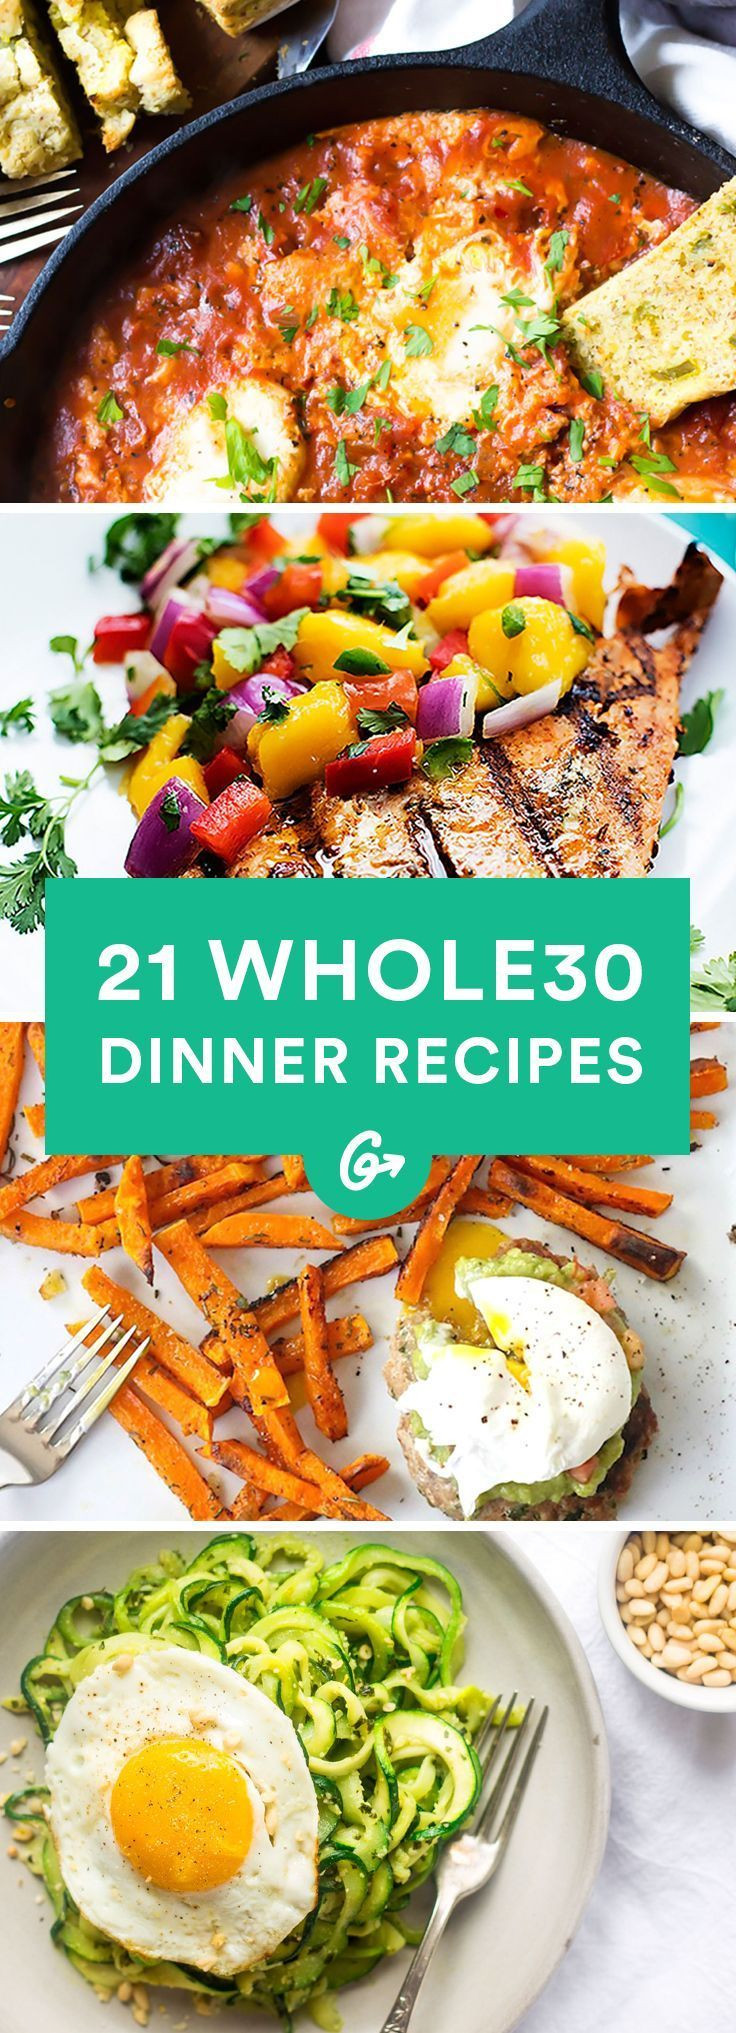 Whole 30 Dinner Ideas
 21 Easy and Delicious Whole30 Dinner Recipes